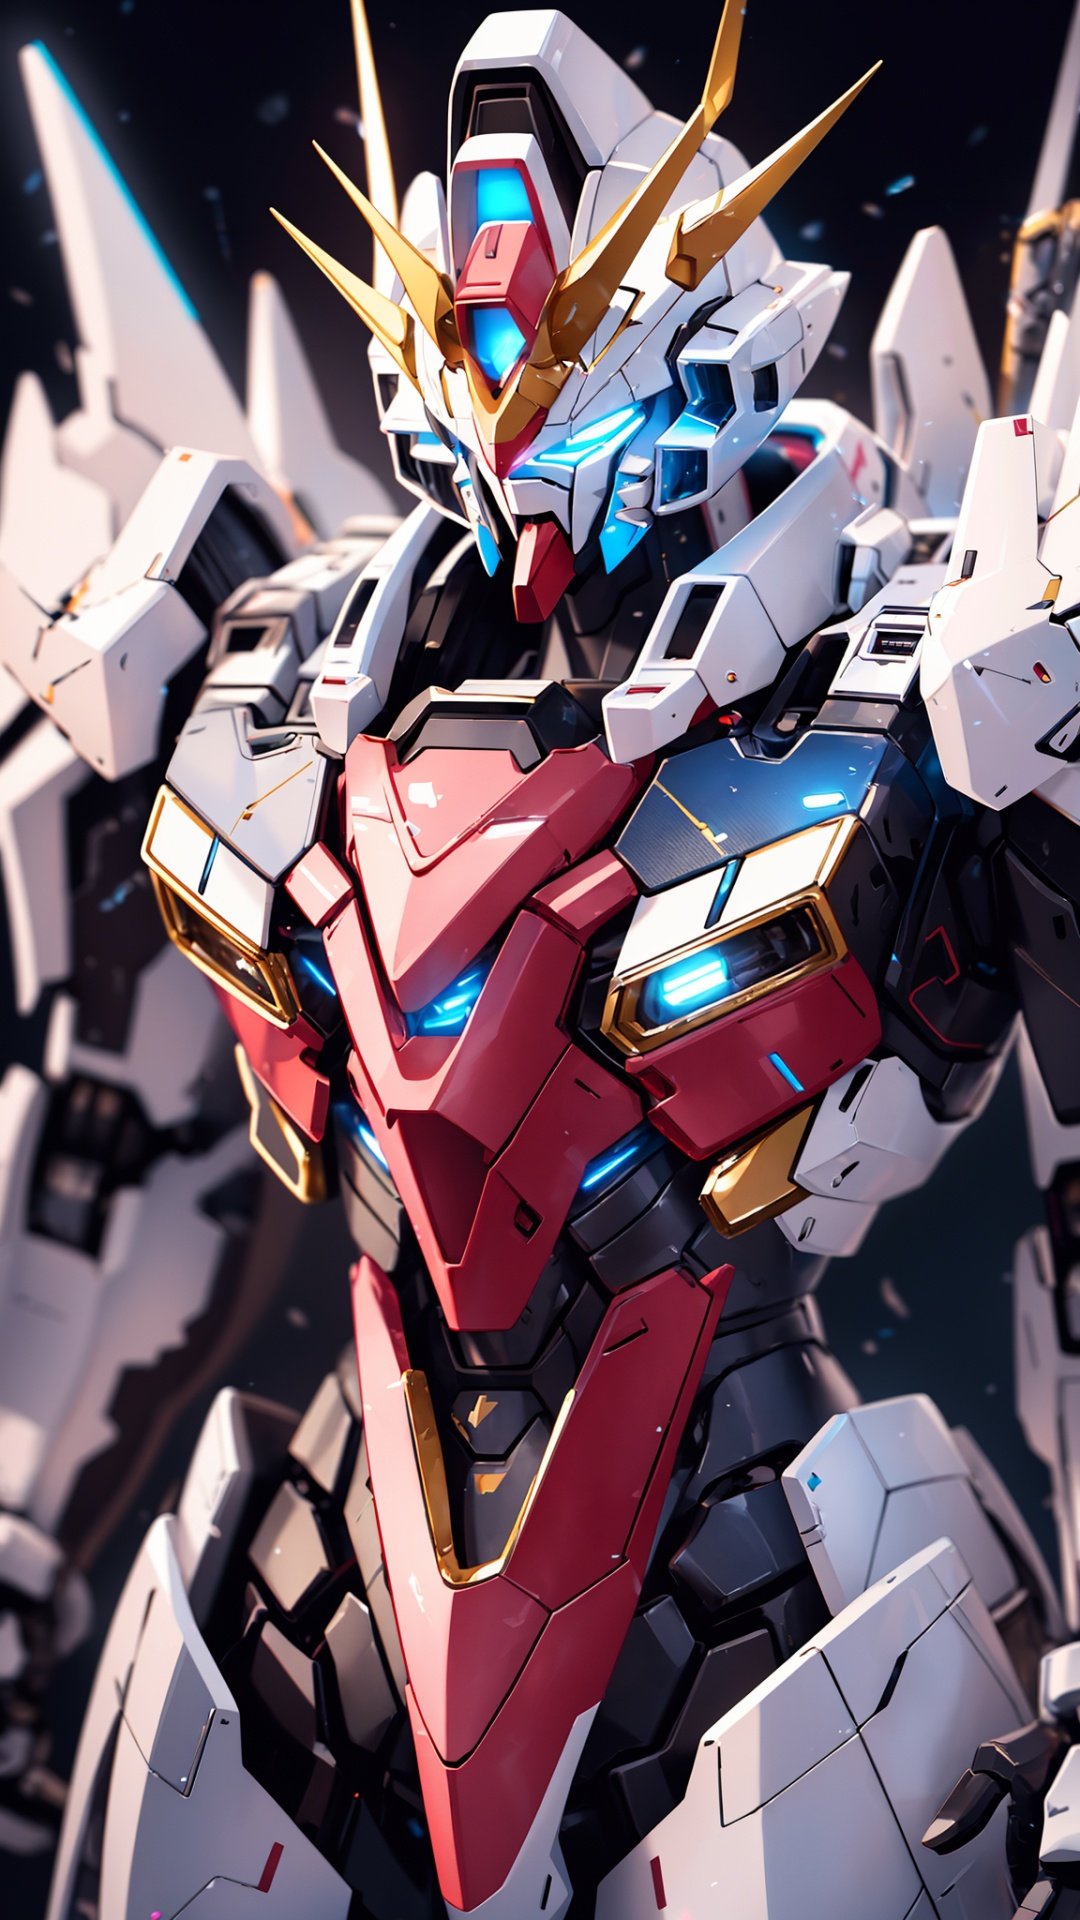 Hyperrealistic art BJ_Gundam,solo,blue_eyes,holding,weapon,holding_weapon,no_humans,glowing,robot,mecha,science_fiction,open_hand,v-fin,cinematic lighting,strong contrast,high level of detail,Best quality,masterpiece,White background,. Extremely high-resolution details,photographic,realism pushed to extreme,fine texture,incredibly lifelike,<lora:Gundam_Mecha_v5.2:0.7>, . Extremely high-resolution details, photographic, realism pushed to extreme, fine texture, incredibly lifelike